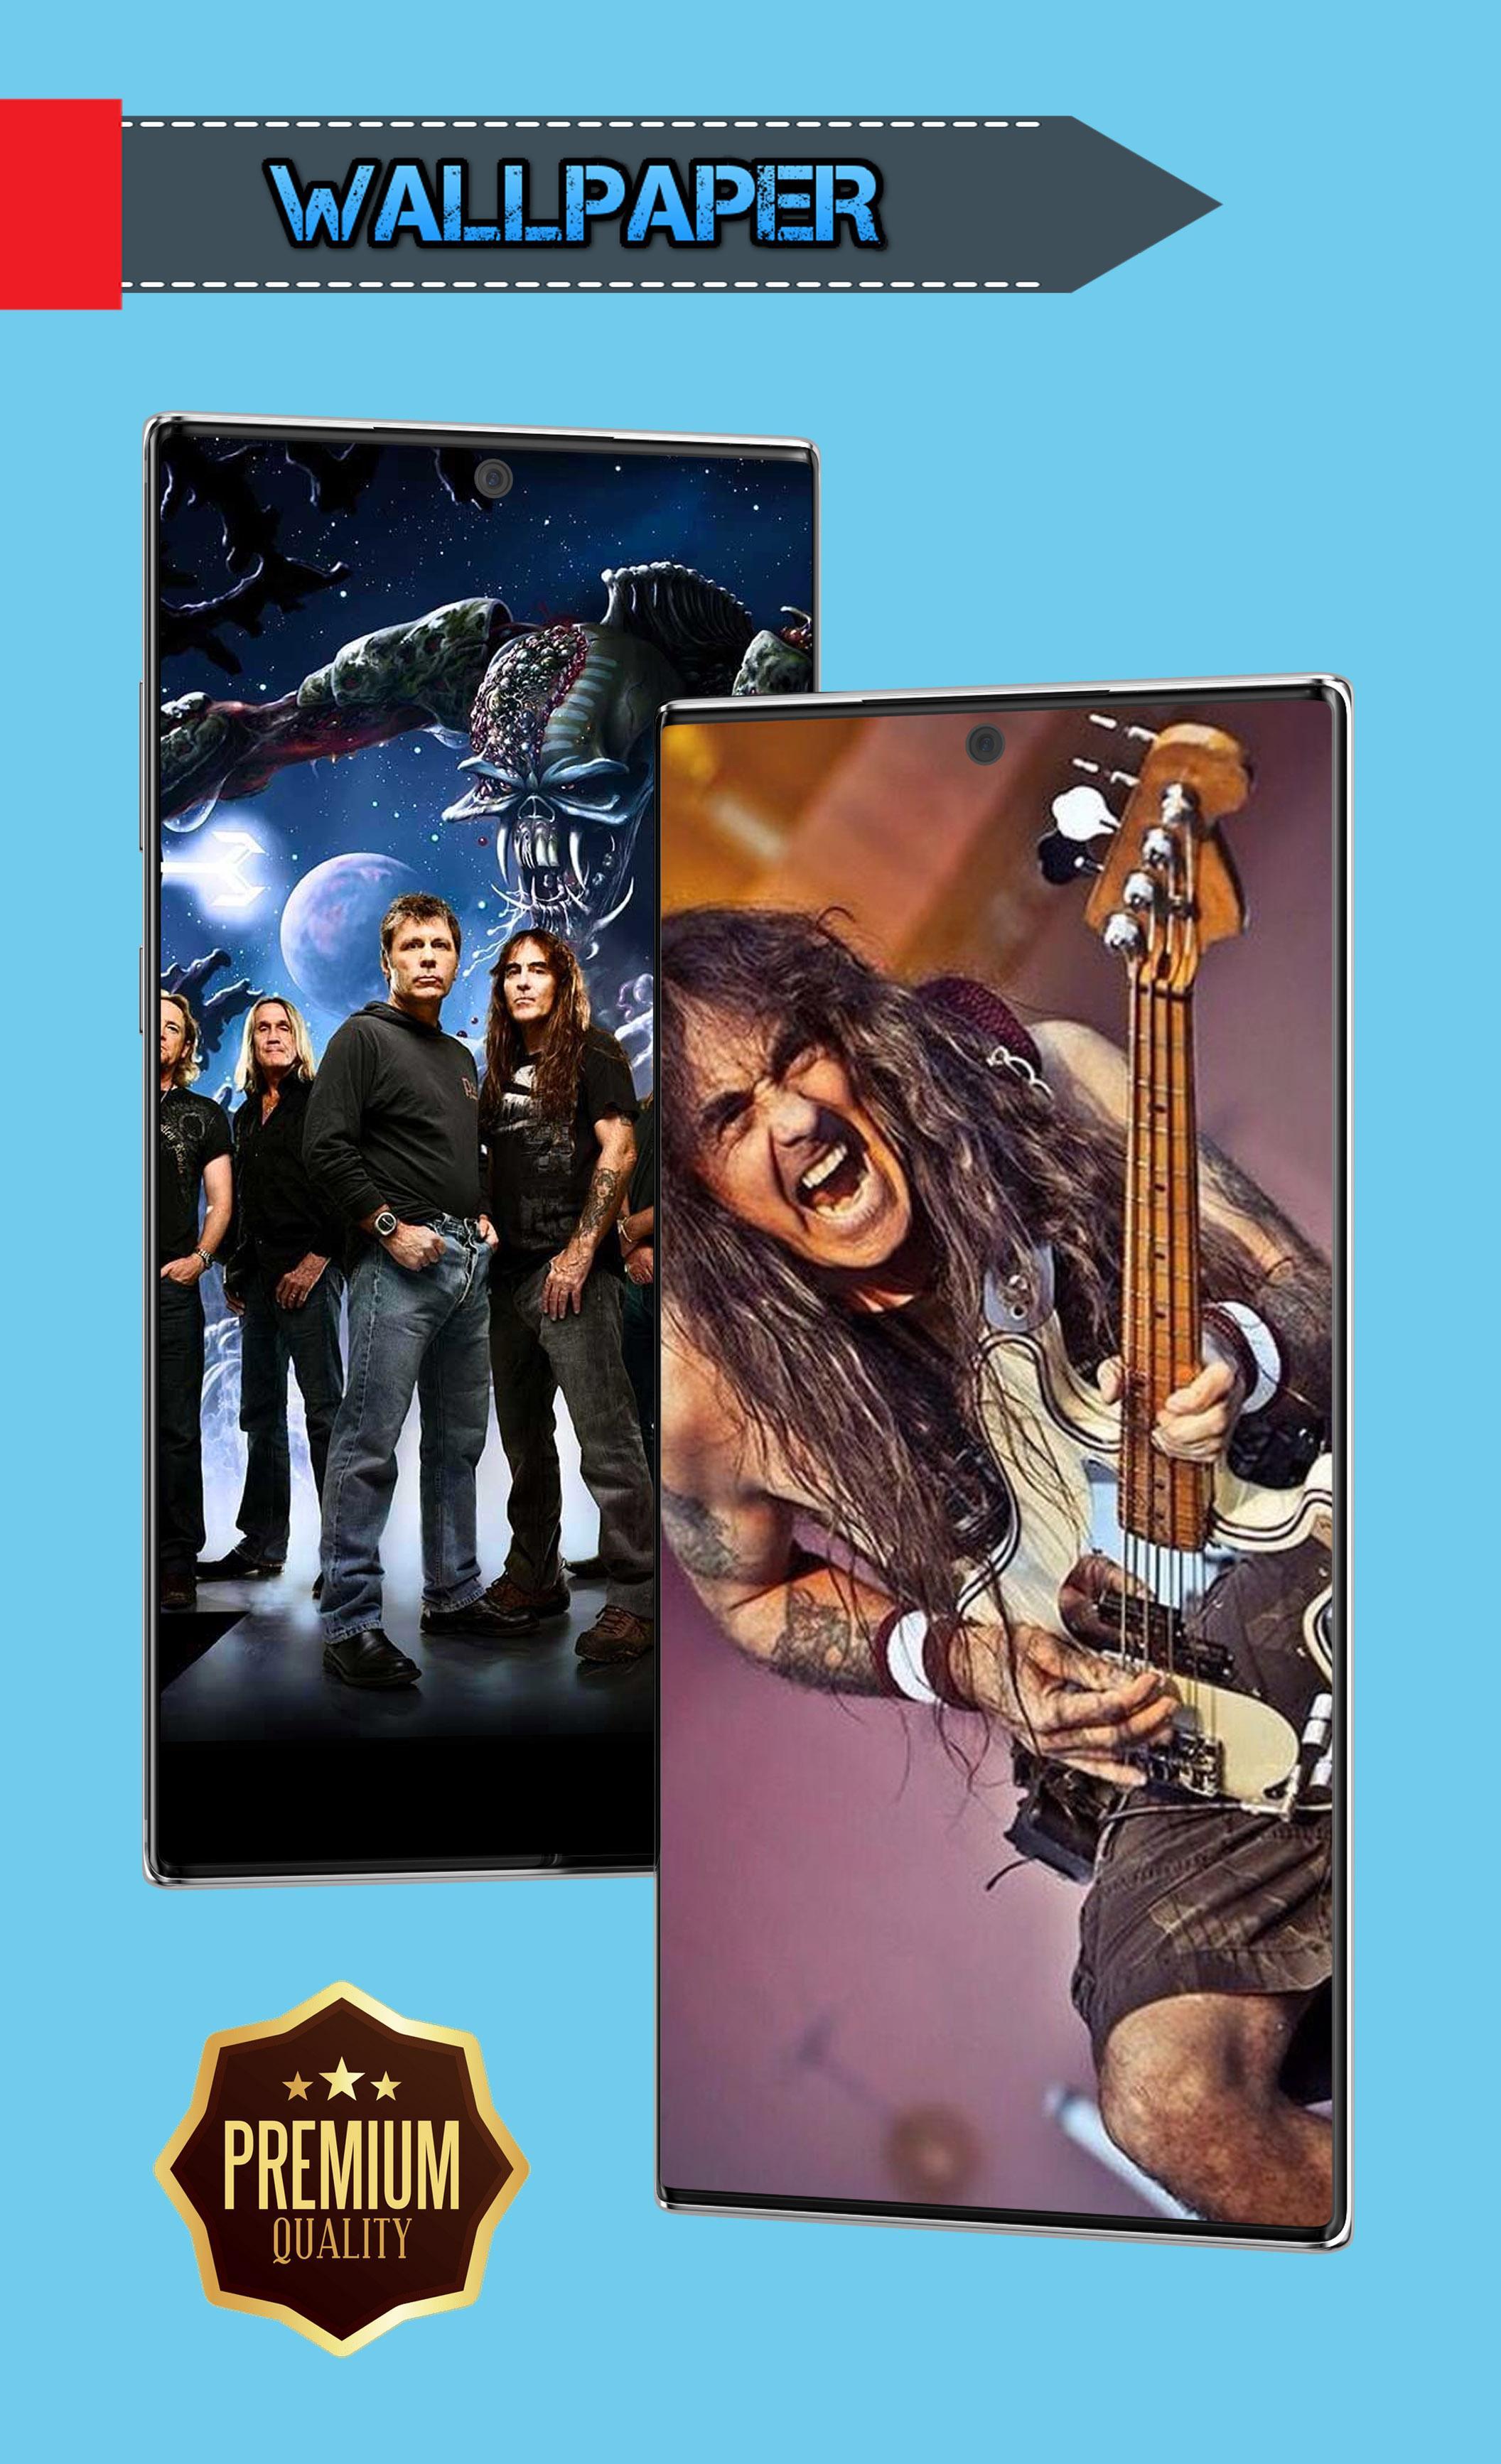 Iron Maiden Wallpapers HD for Android - APK Download